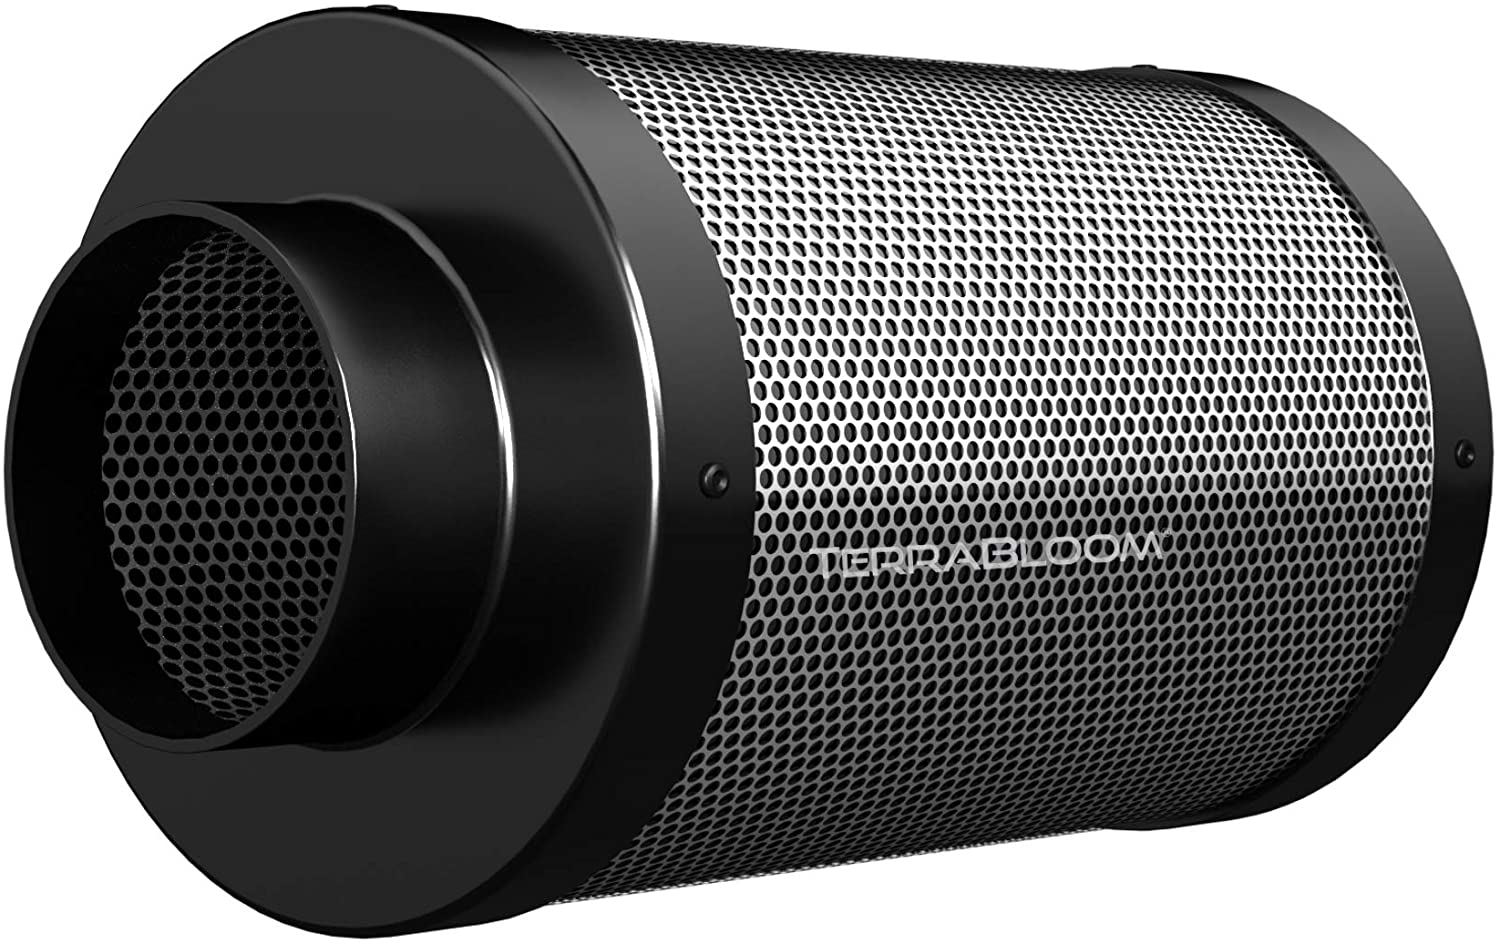 TerraBloom Air Carbon Filter, 4" x 12", Activated Charcoal Scrubber for Inline Duct Fans Up to 200 CFM. for Grow Tent Ventilation Kits, Hydroponics, Odor Removal